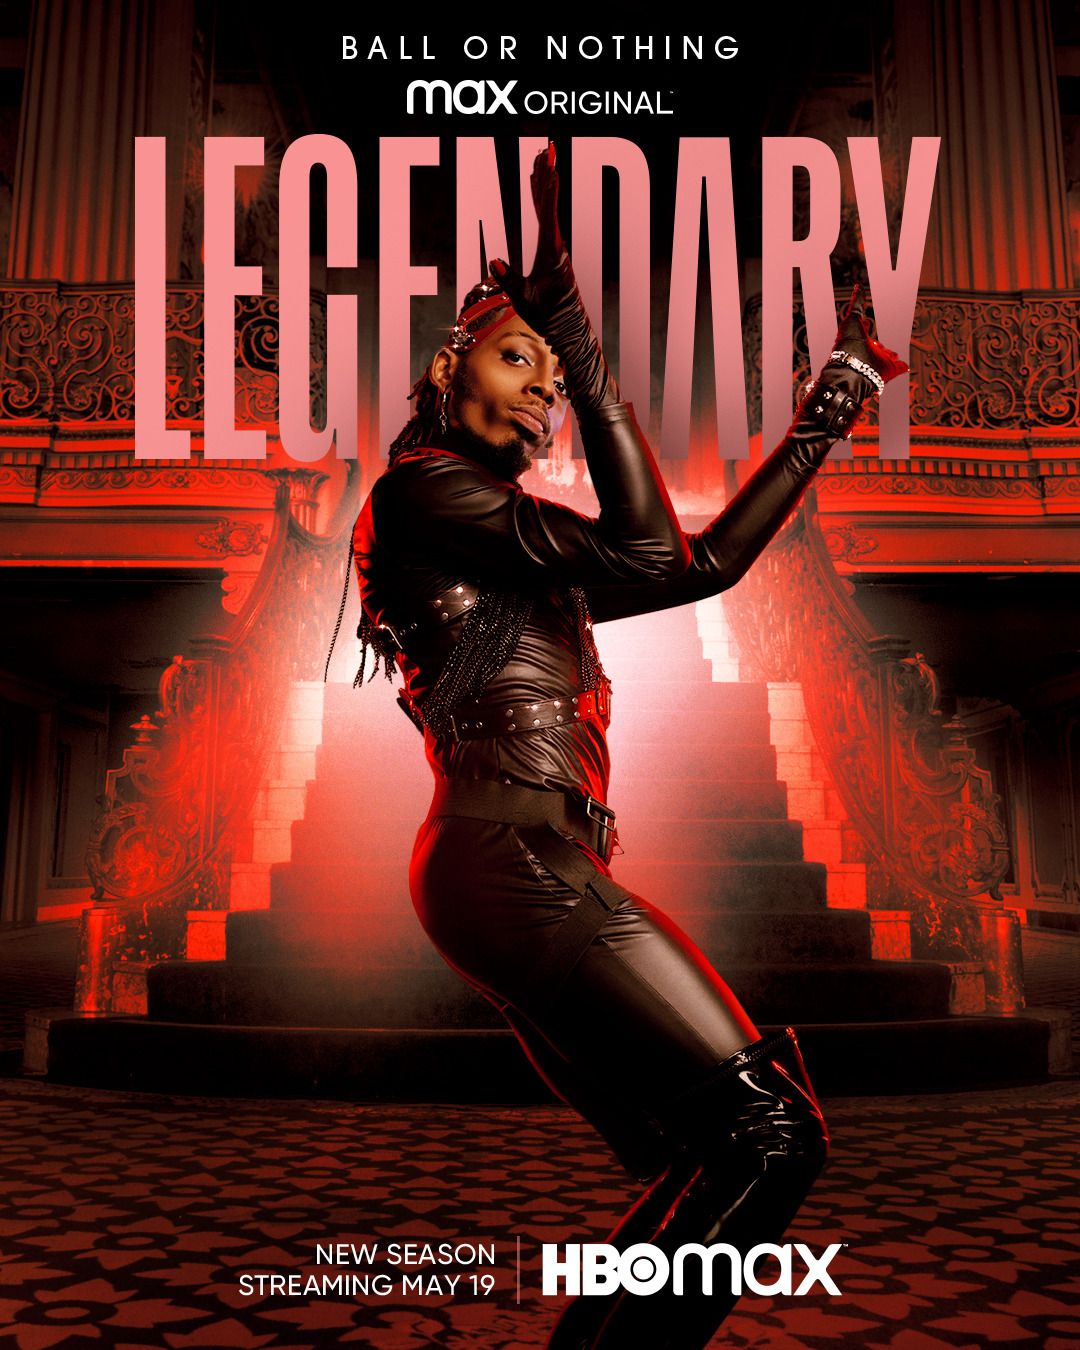 Extra Large TV Poster Image for Legendary (#168 of 173)